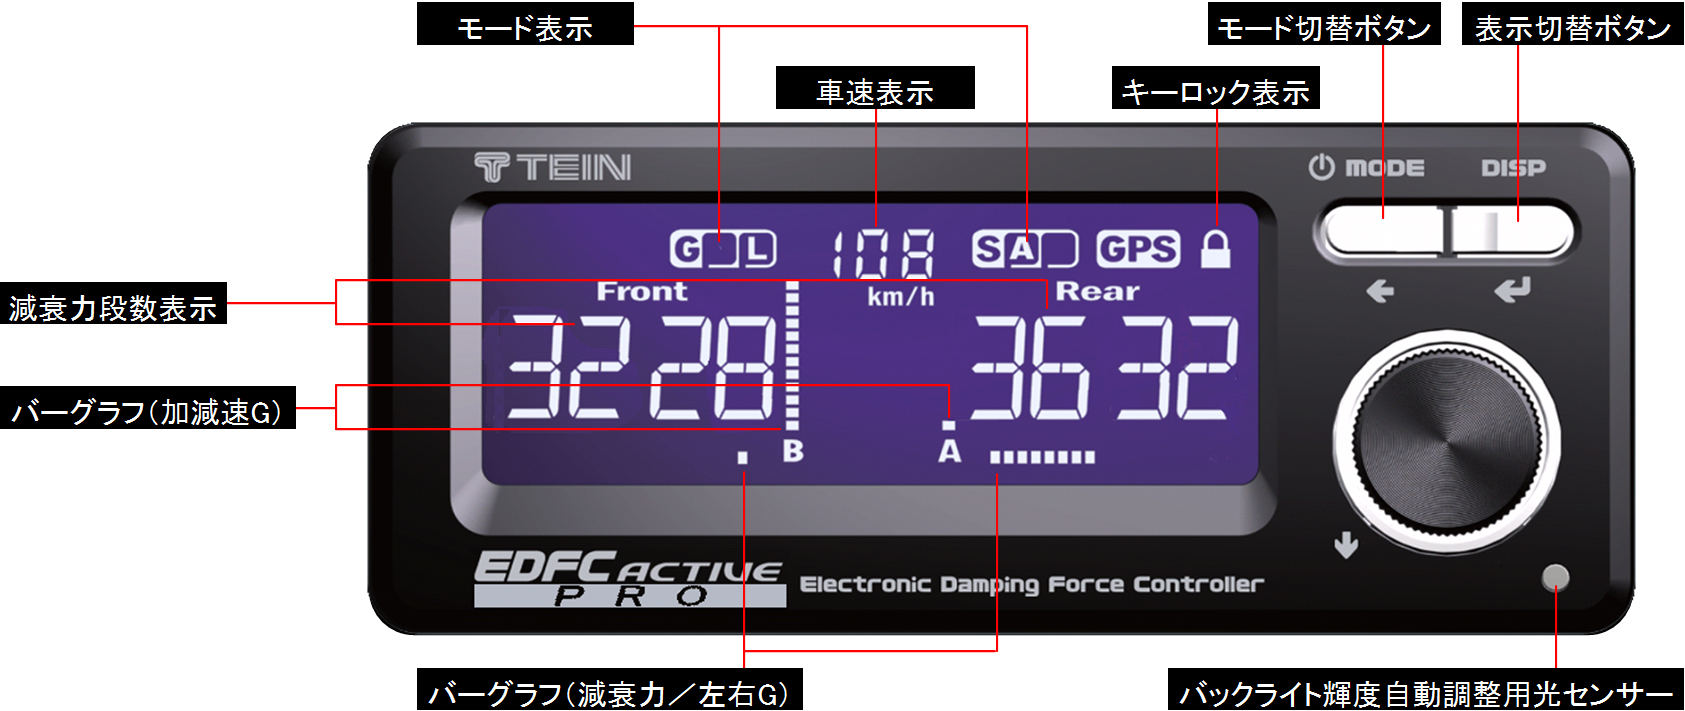 TEIN EDFC ACTIVE PROコントローラーキット